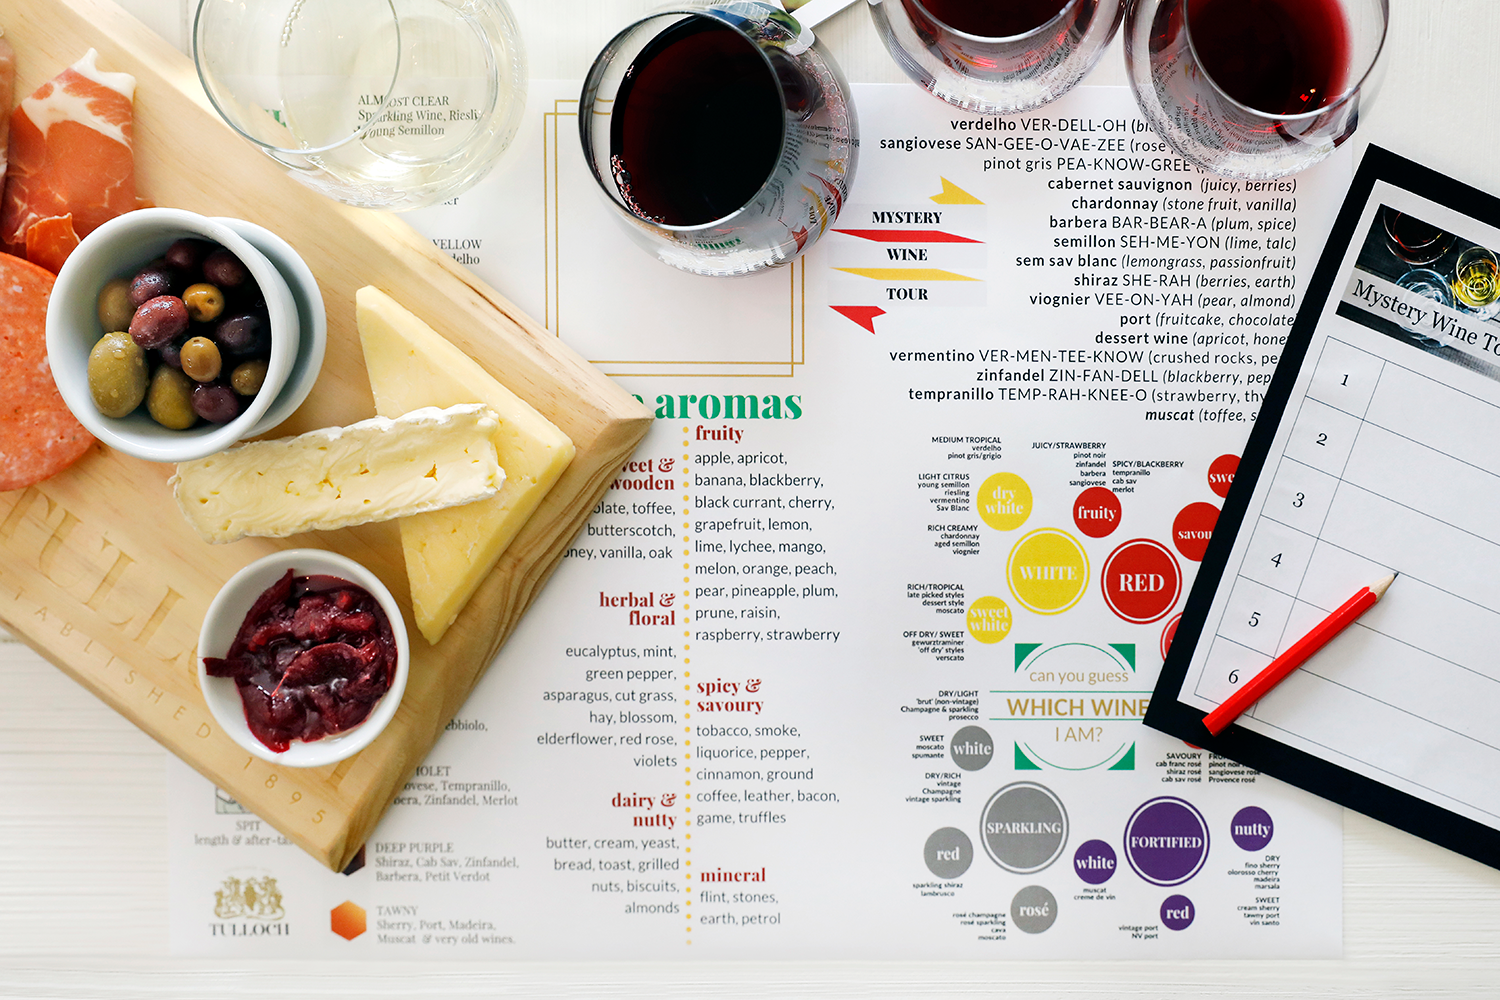 Tulloch Wines - Mystery Wine Tasting Experience with Local Cheese and Charcuterie